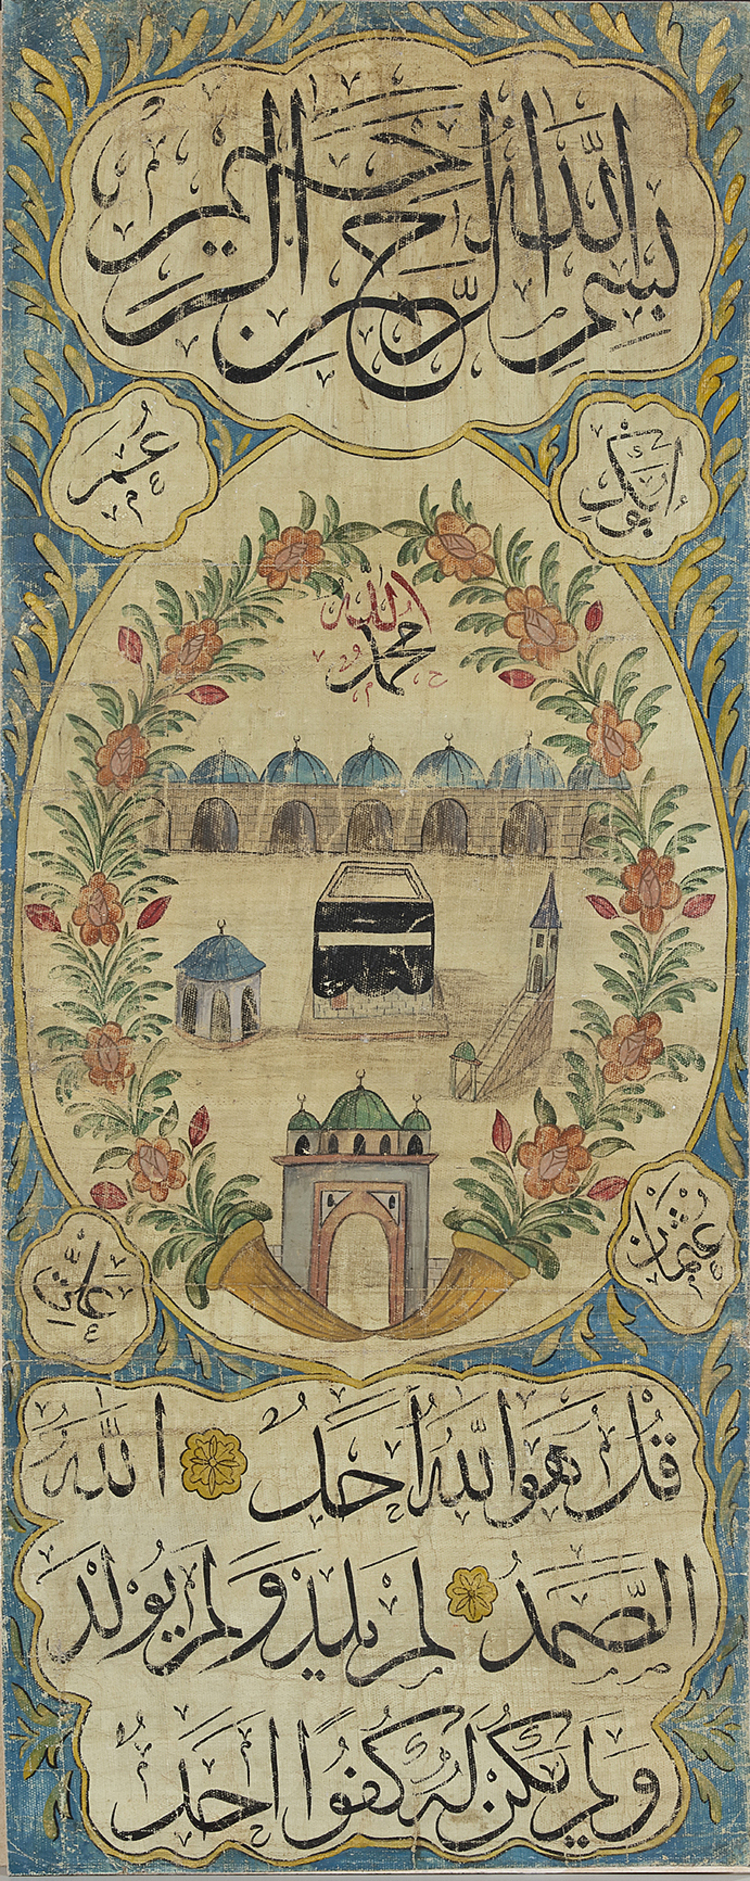 An Islamic painting depicting Mecca and calligraphy